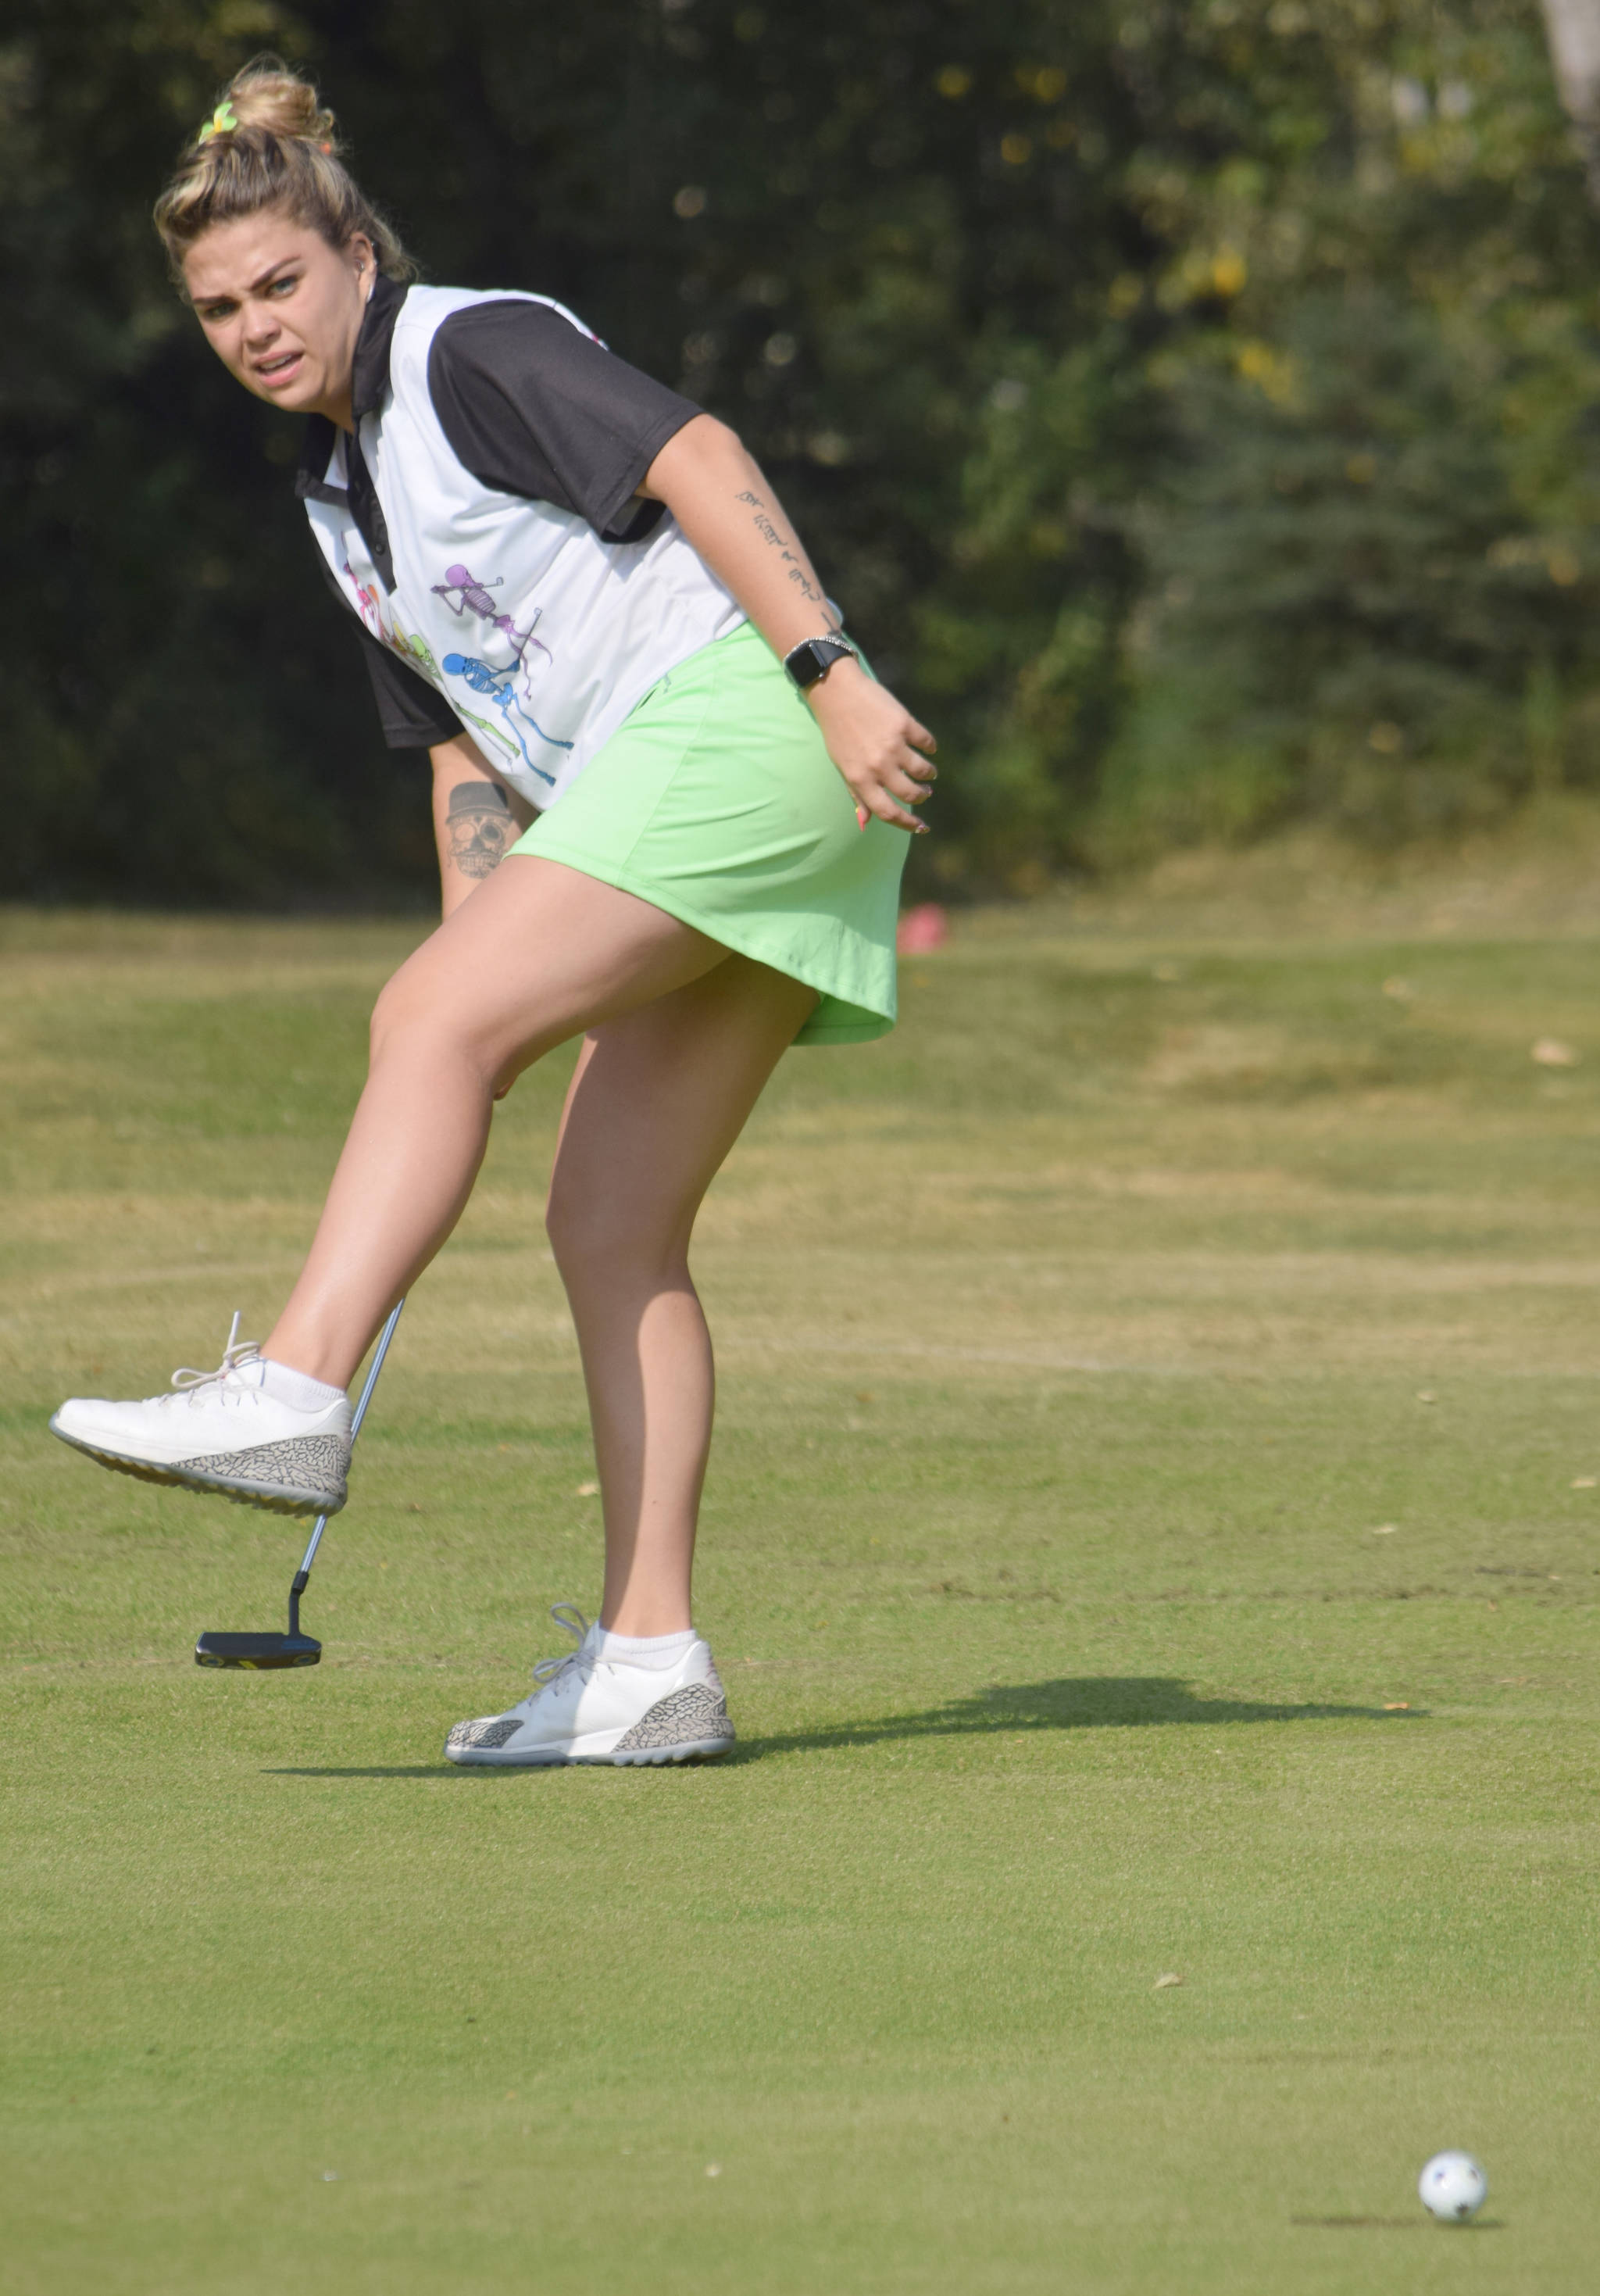 Halcyon Swisher, of Anchorage, reacts as her putt on No. 18 just misses Sunday, Aug. 25, 2019, during the Kenai Peninsula Open at Birch Ridge Golf Course in Soldotna, Alaska. (Photo by Jeff Helminiak/Peninsula Clarion)